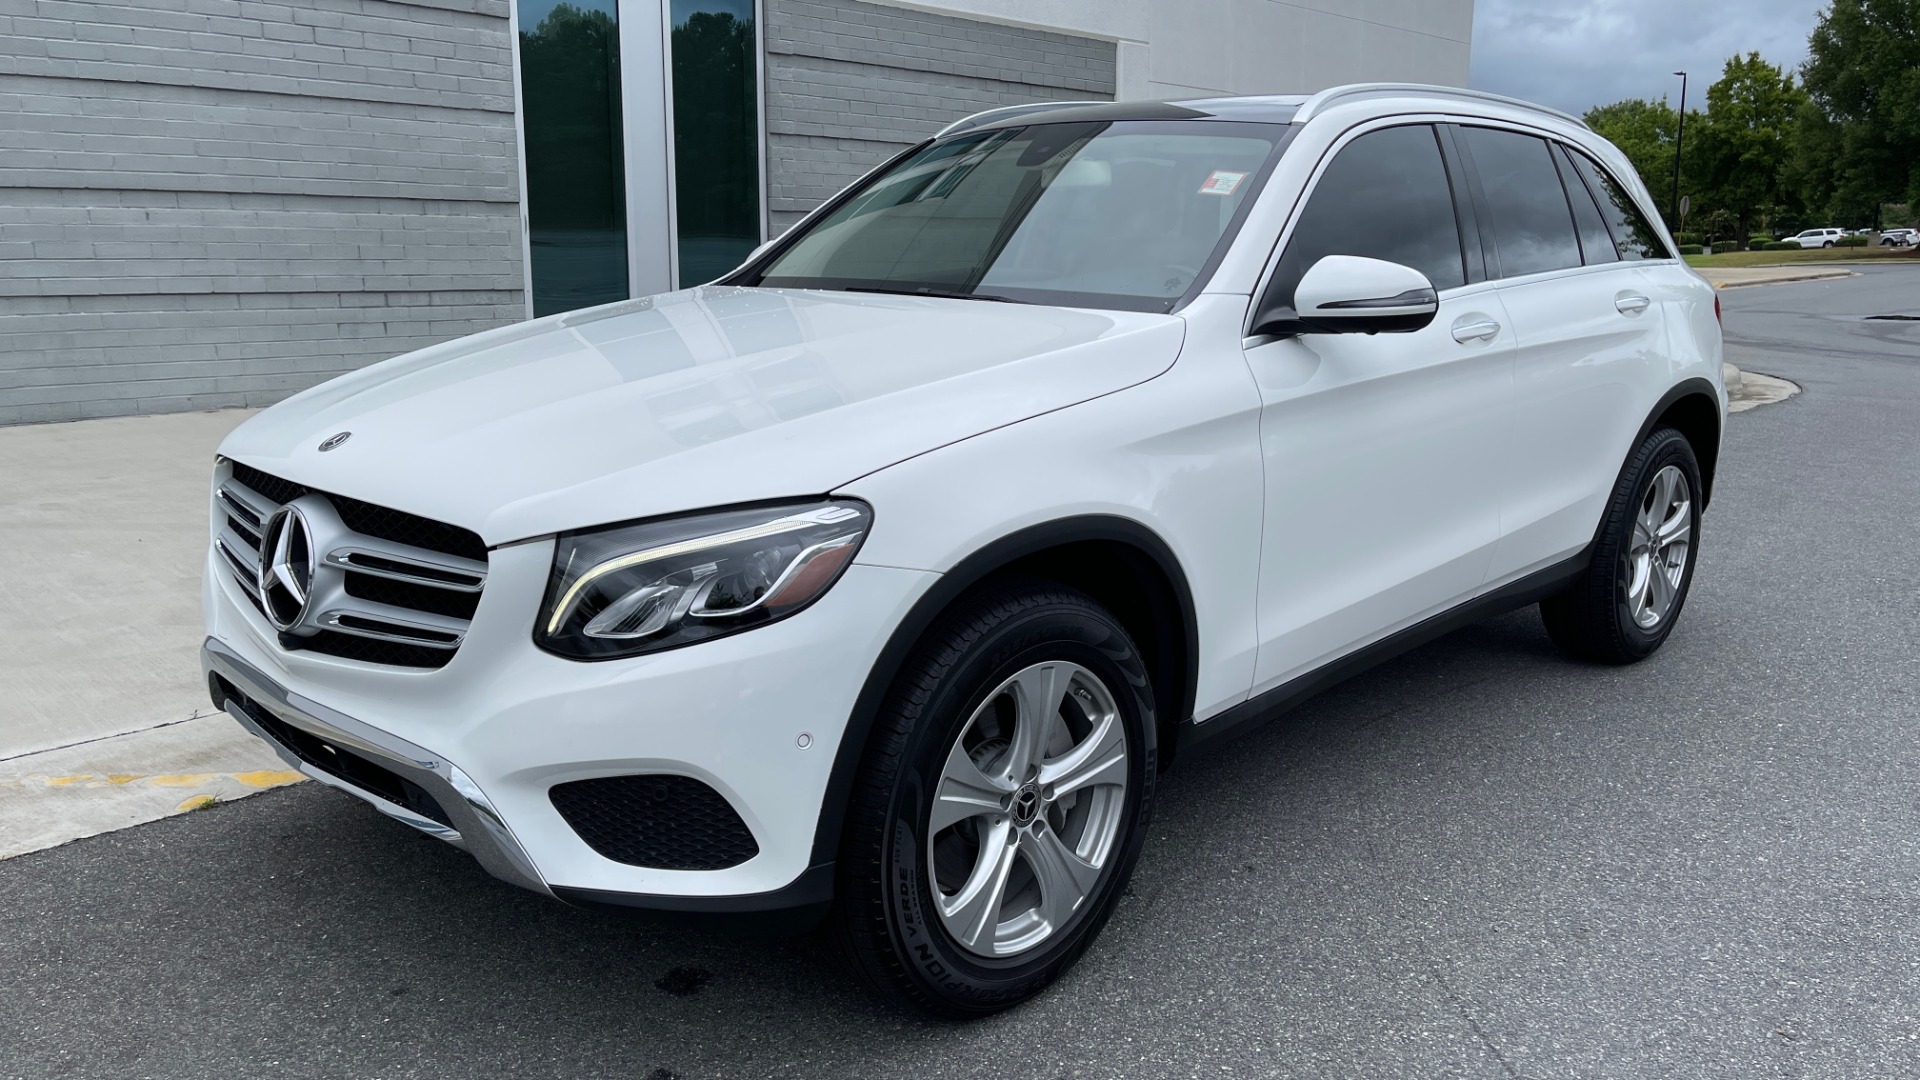 Used 2018 Mercedes-Benz GLC 300 PREMIUM / PANO-ROOF / HTD STS / PARK ASST / REARVIEW for sale Sold at Formula Imports in Charlotte NC 28227 3